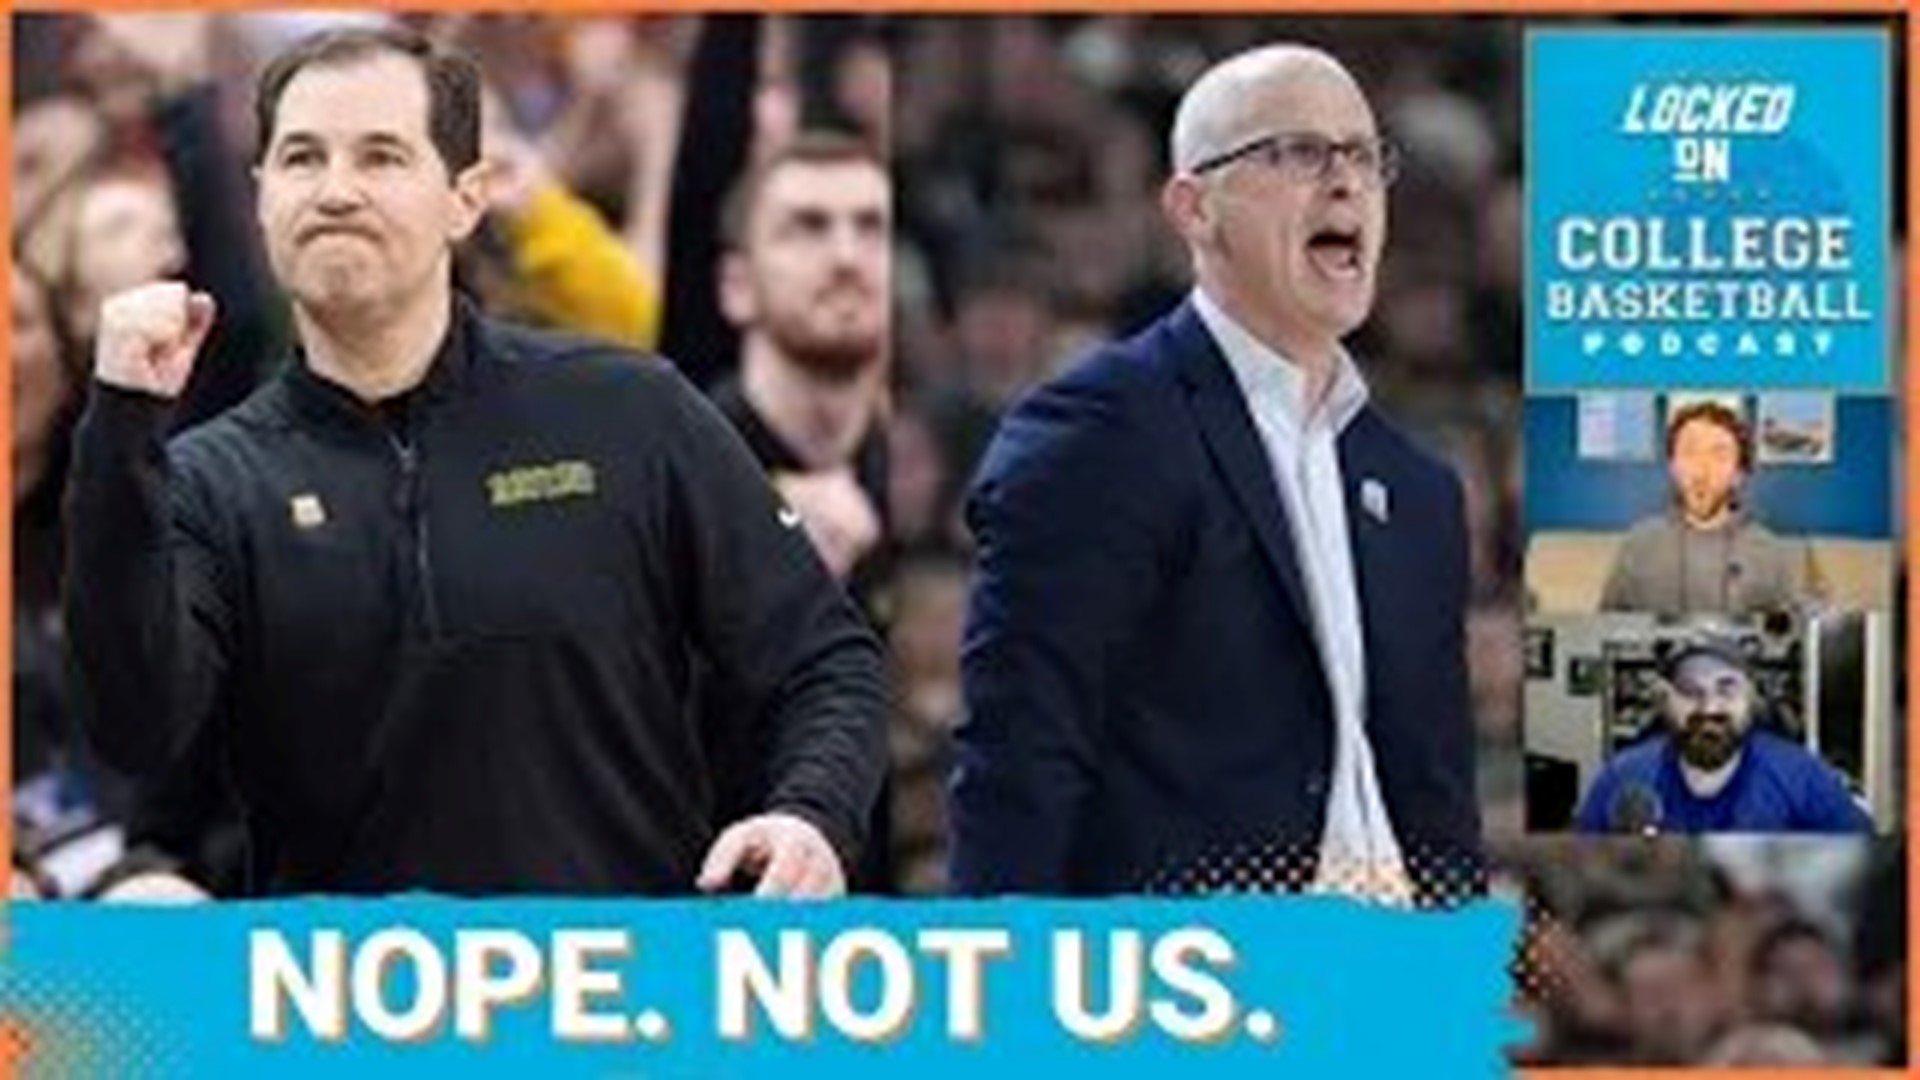 On Thursday morning, Scott Drew officially and publicly turned down Kentucky to stay at Baylor. Dan Hurley once again affirmed his desire to stay at UConn.